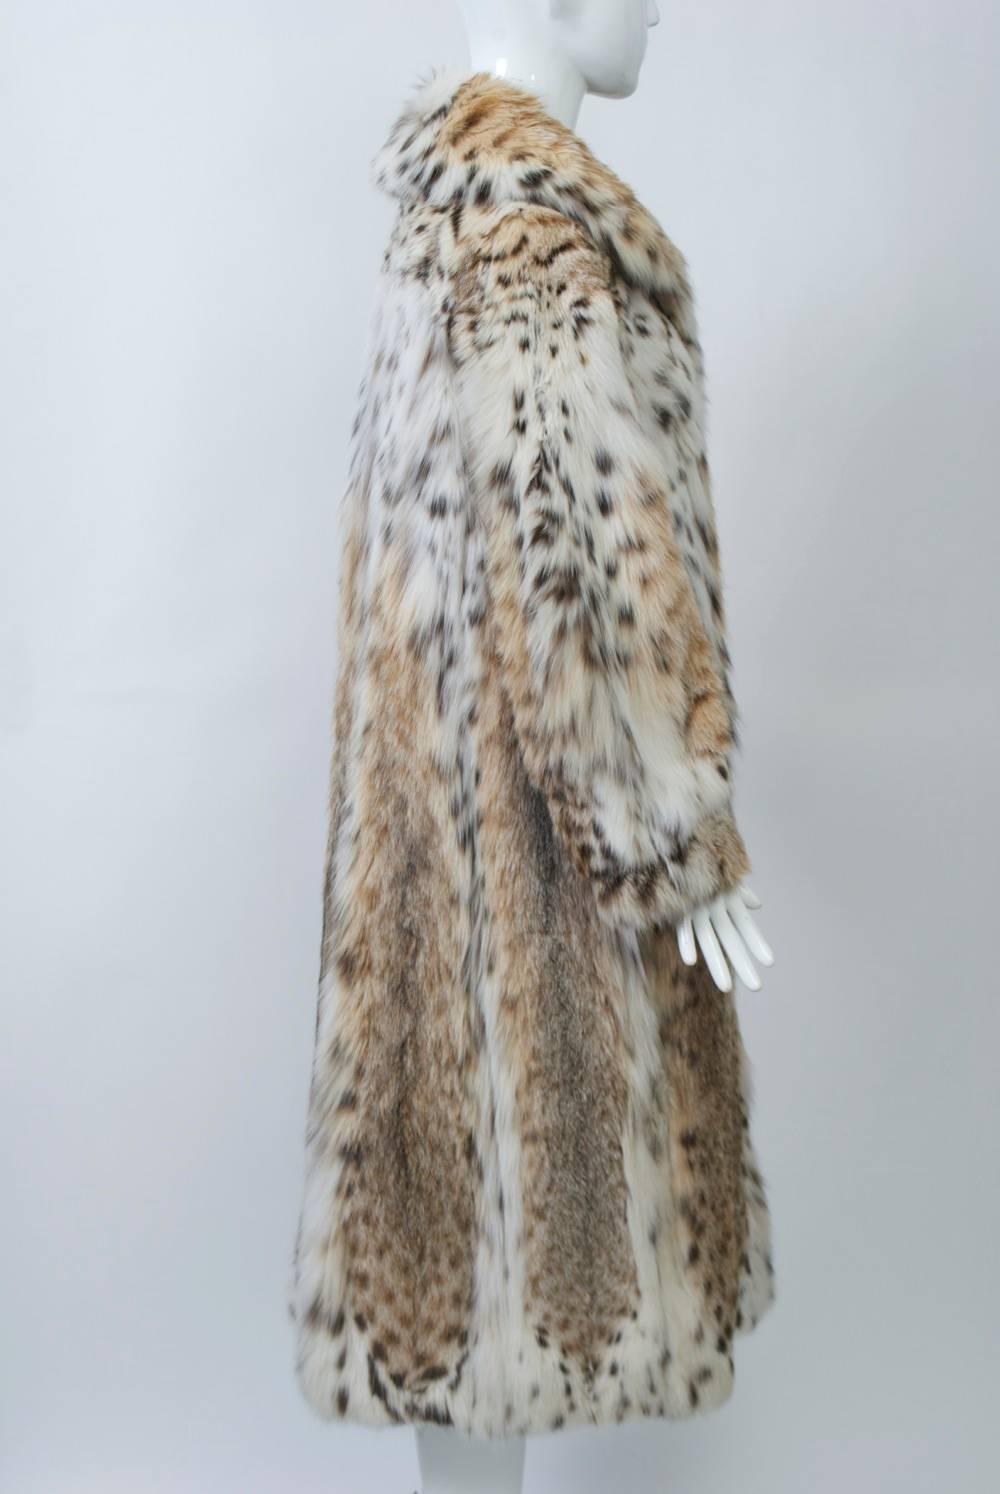 Full-length coat, c.1970s, of spotted lynx fur. Single breasted with large collar that can stand up or be fastened tight for extra warmth. Side slit pockets. Approximate size Small.